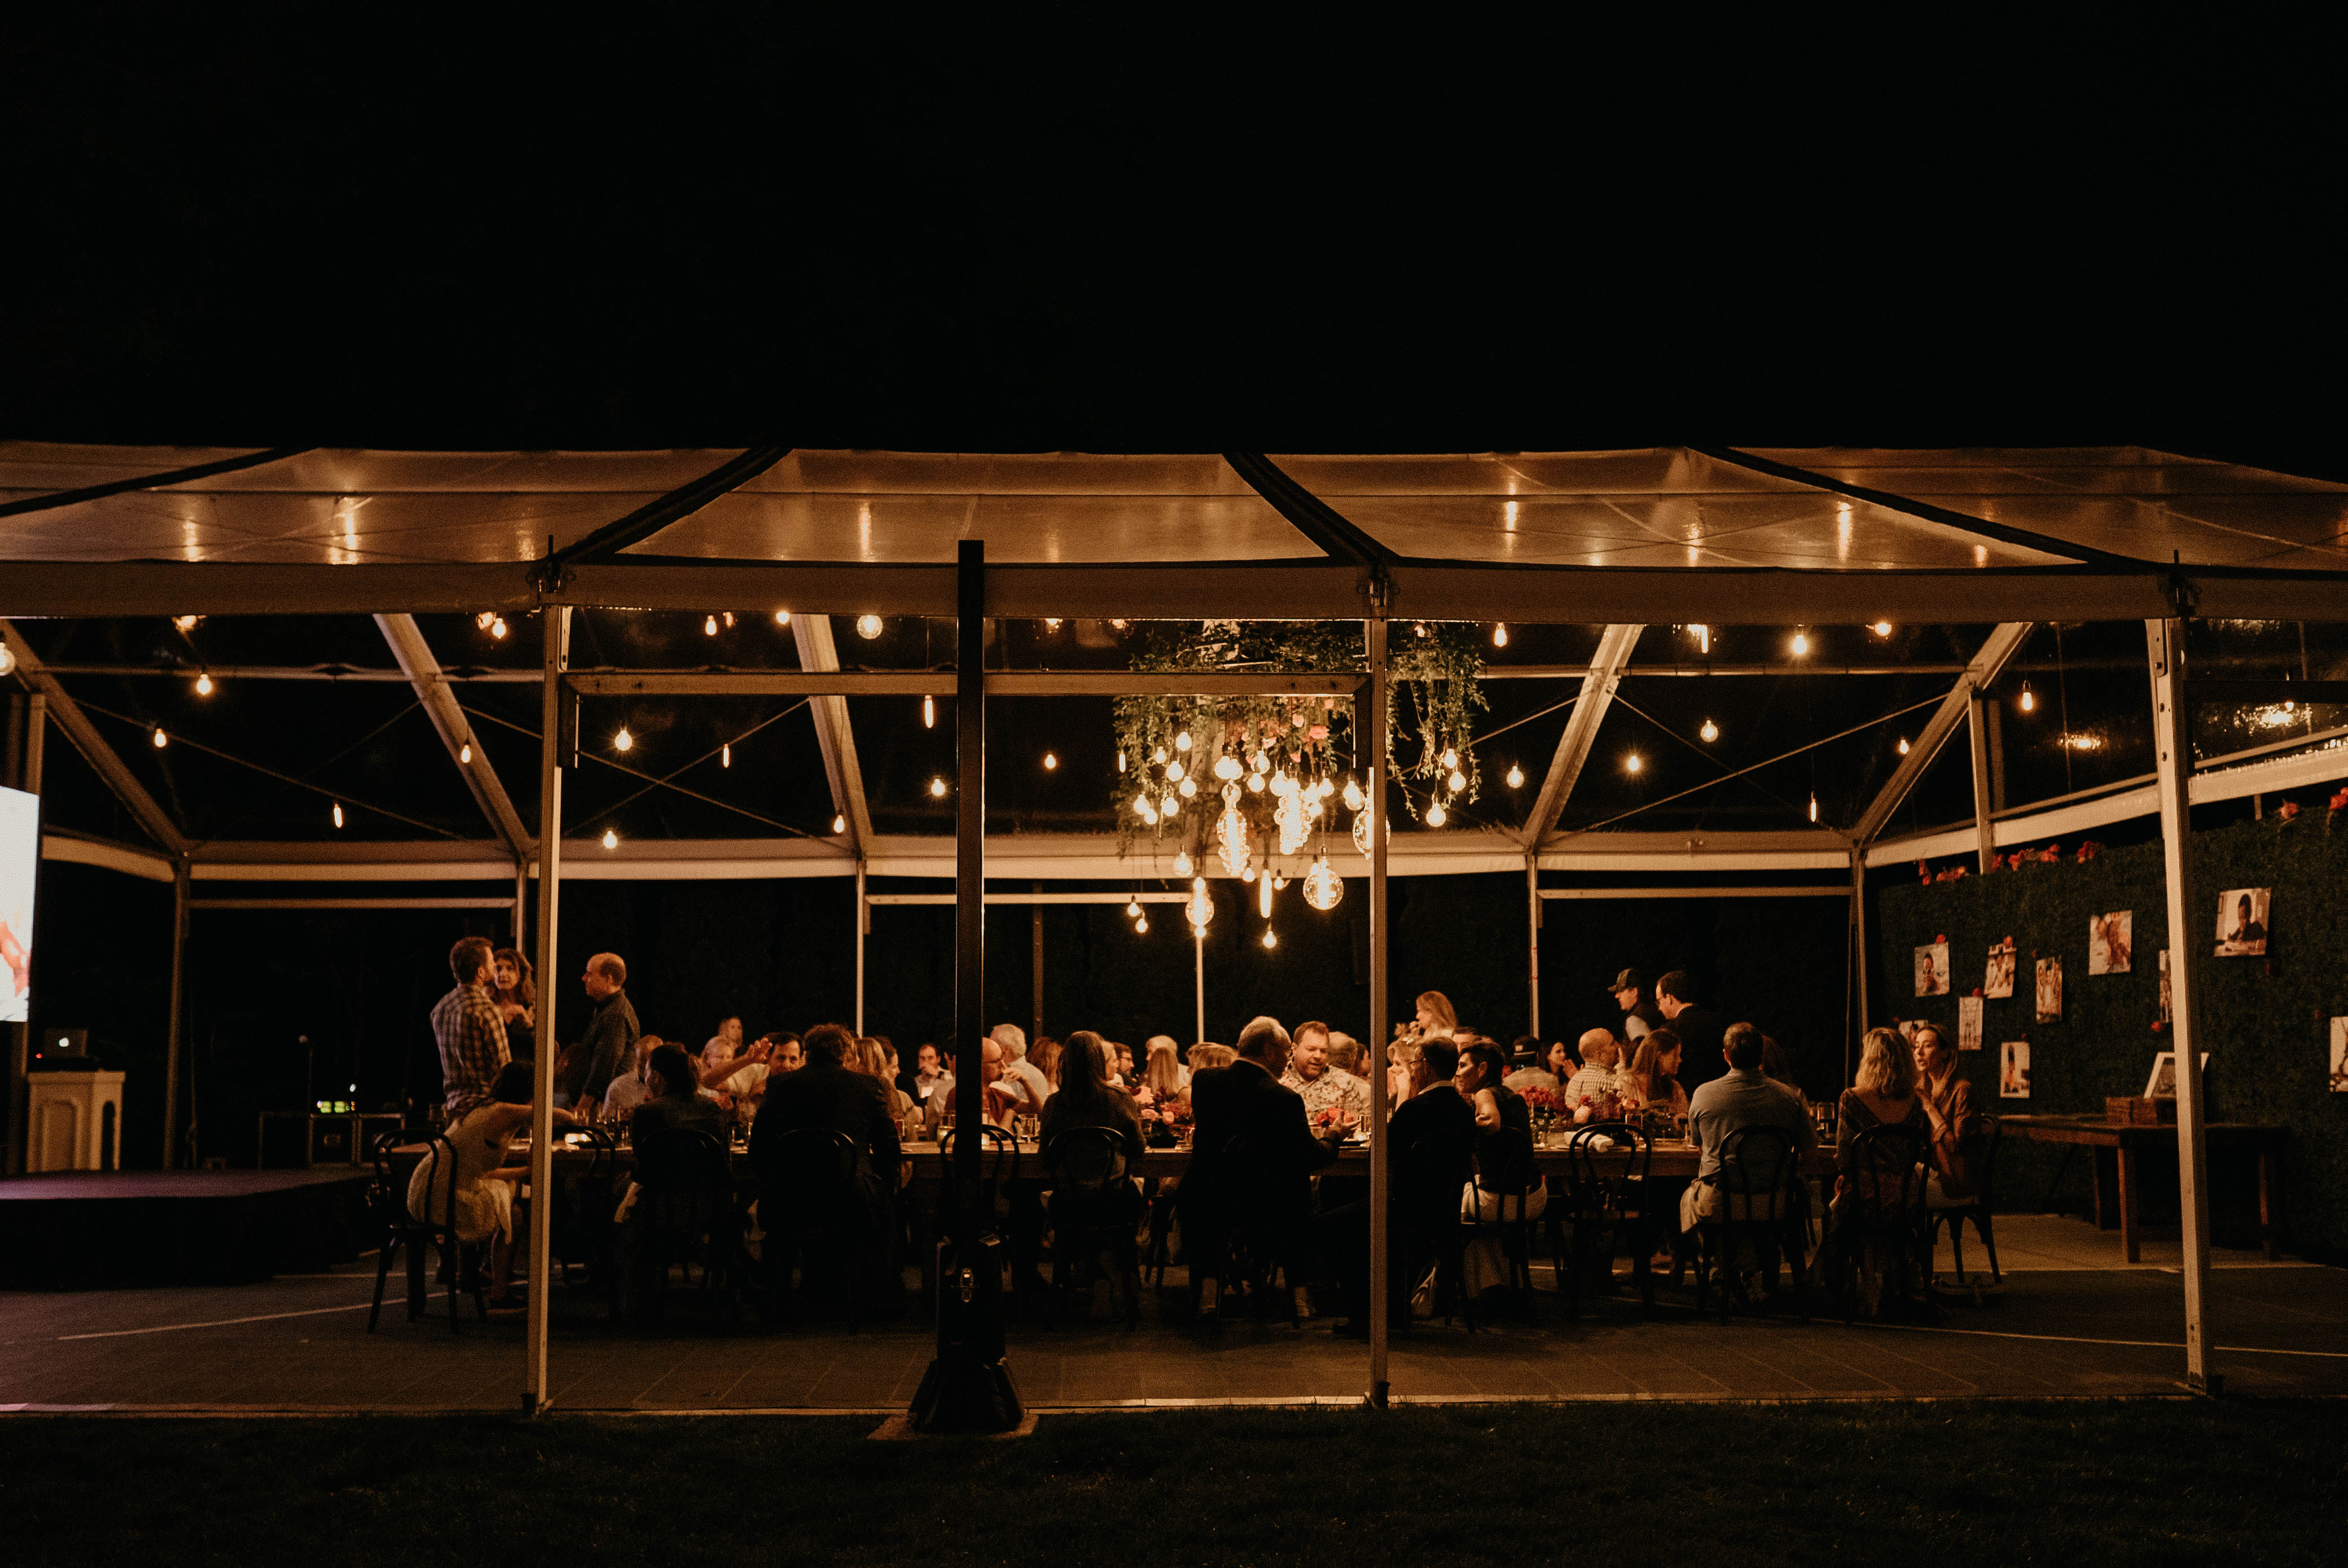 Build your own outdoor event venue with Chattanooga Tent, and host your holiday party in style.